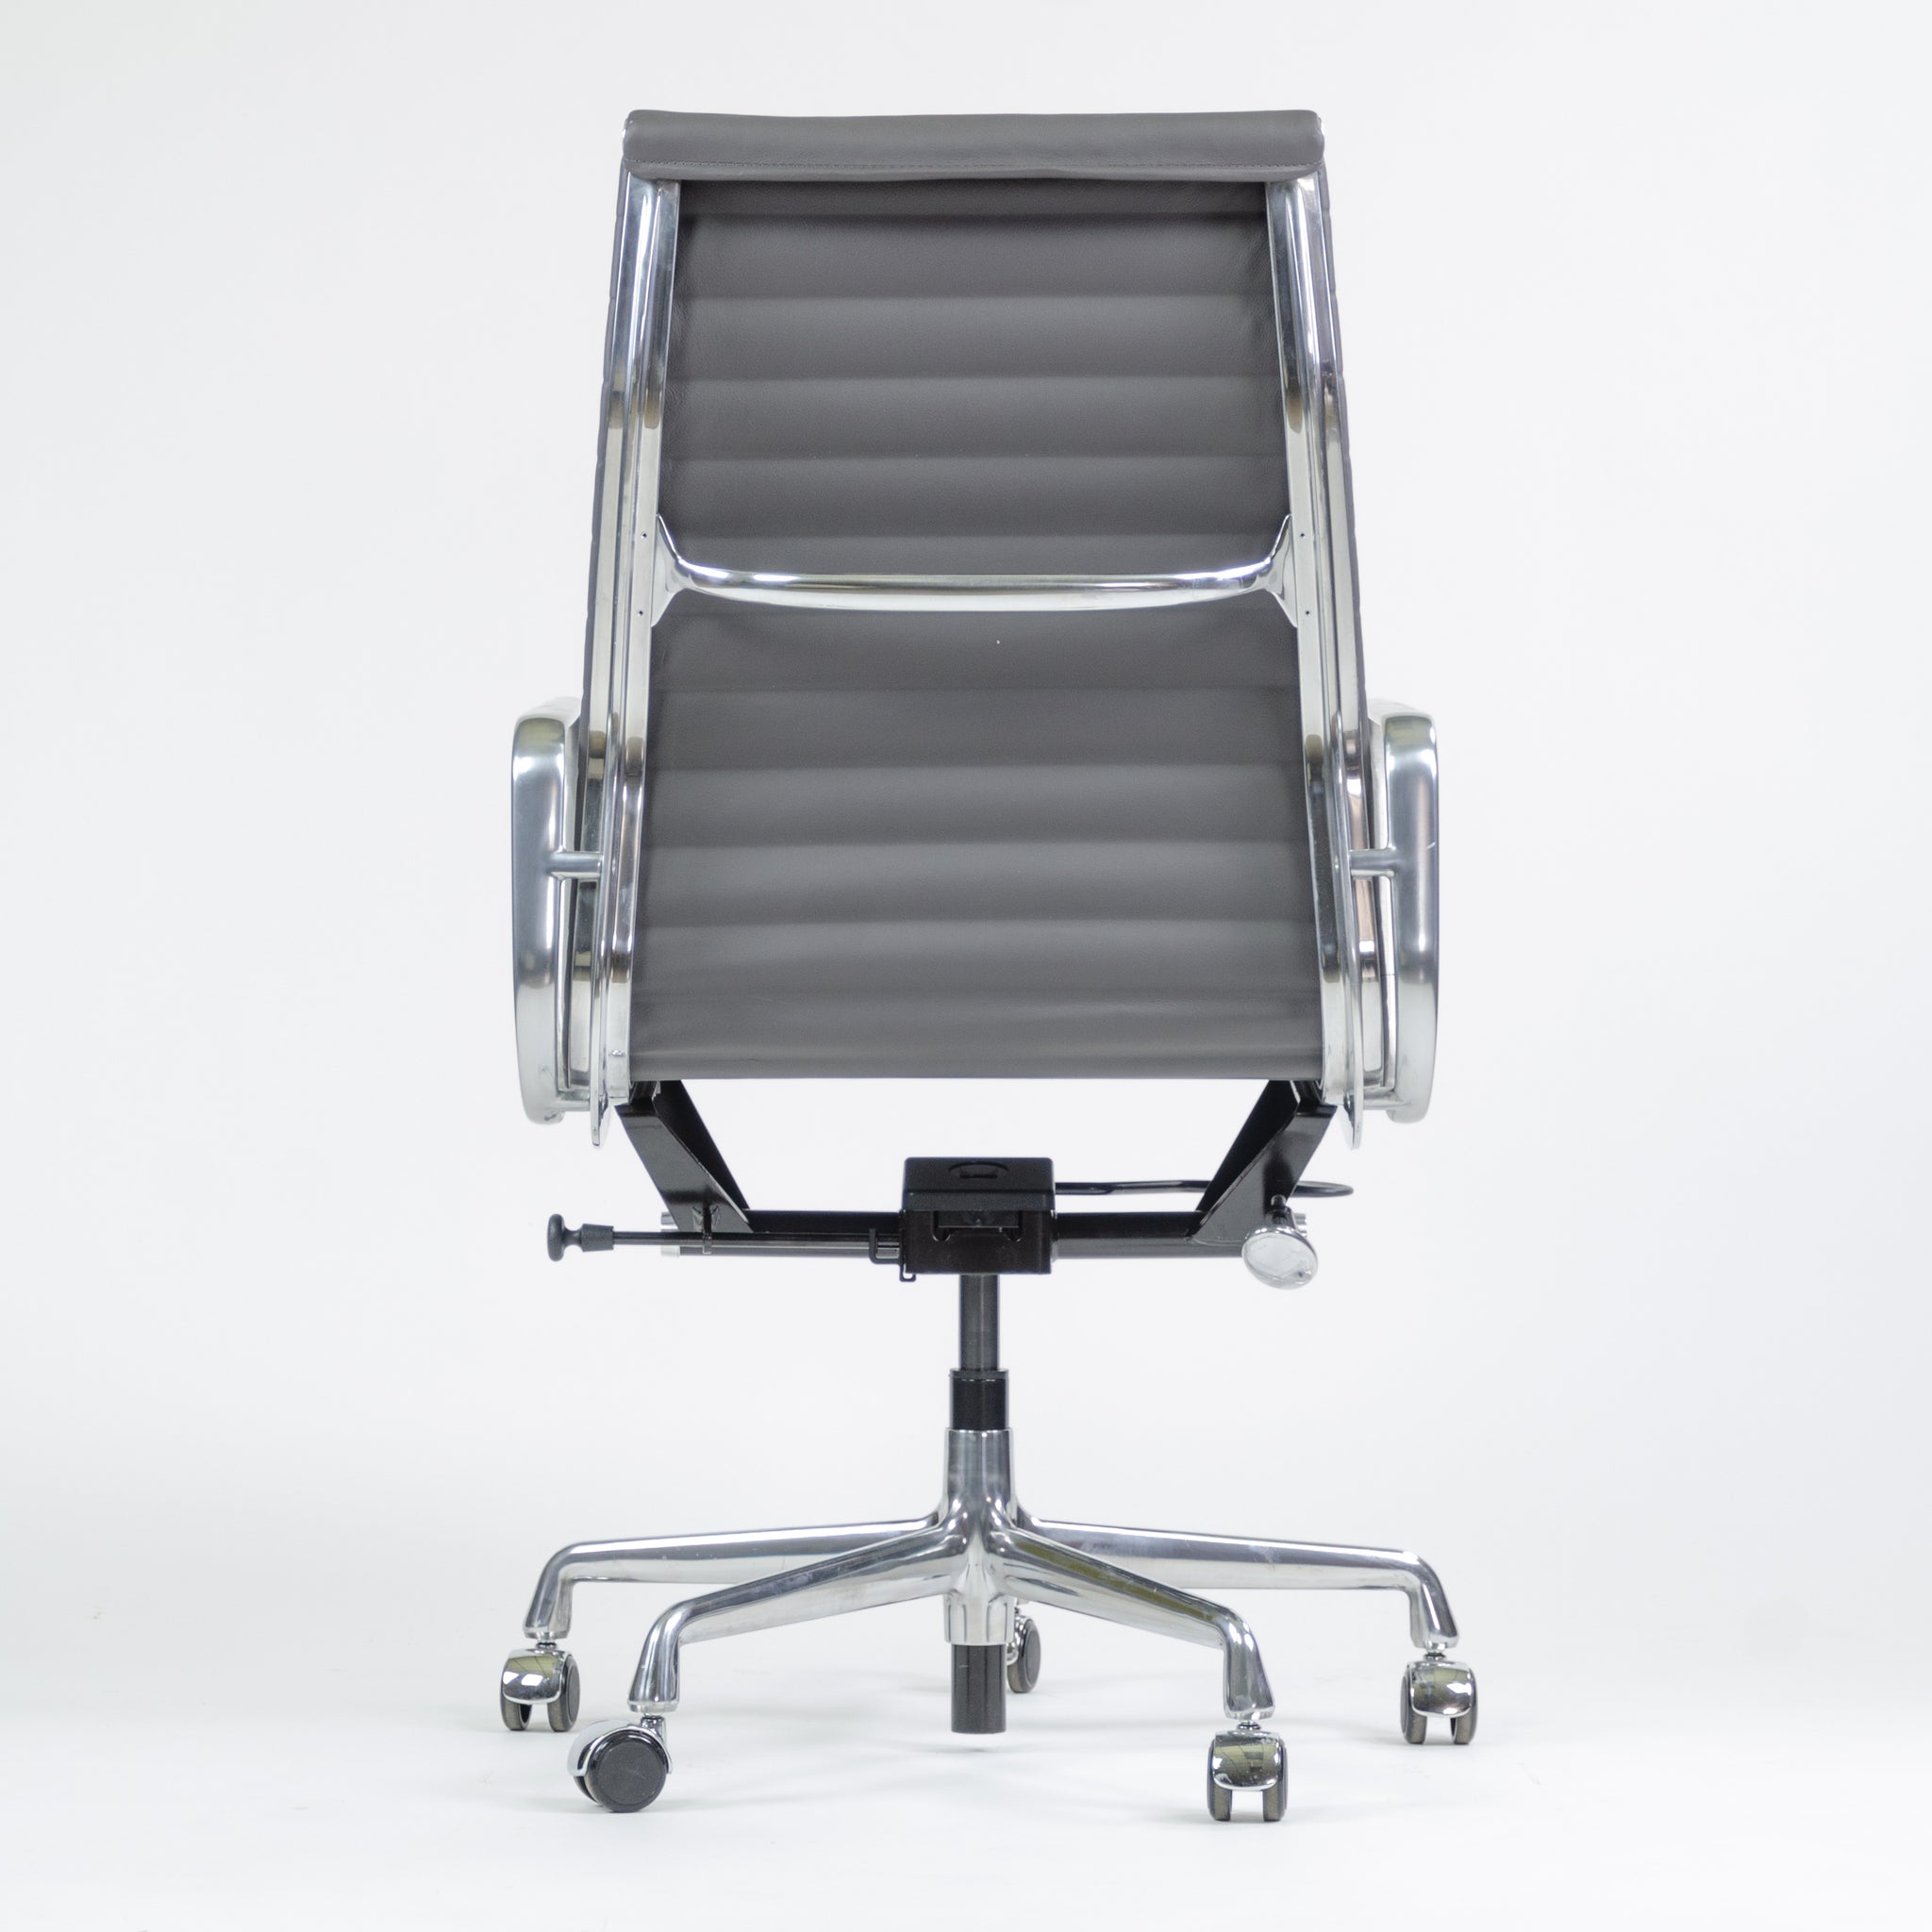 SOLD Eames Herman Miller Leather High Executive Aluminum Group Desk Chairs 2018 1x Available